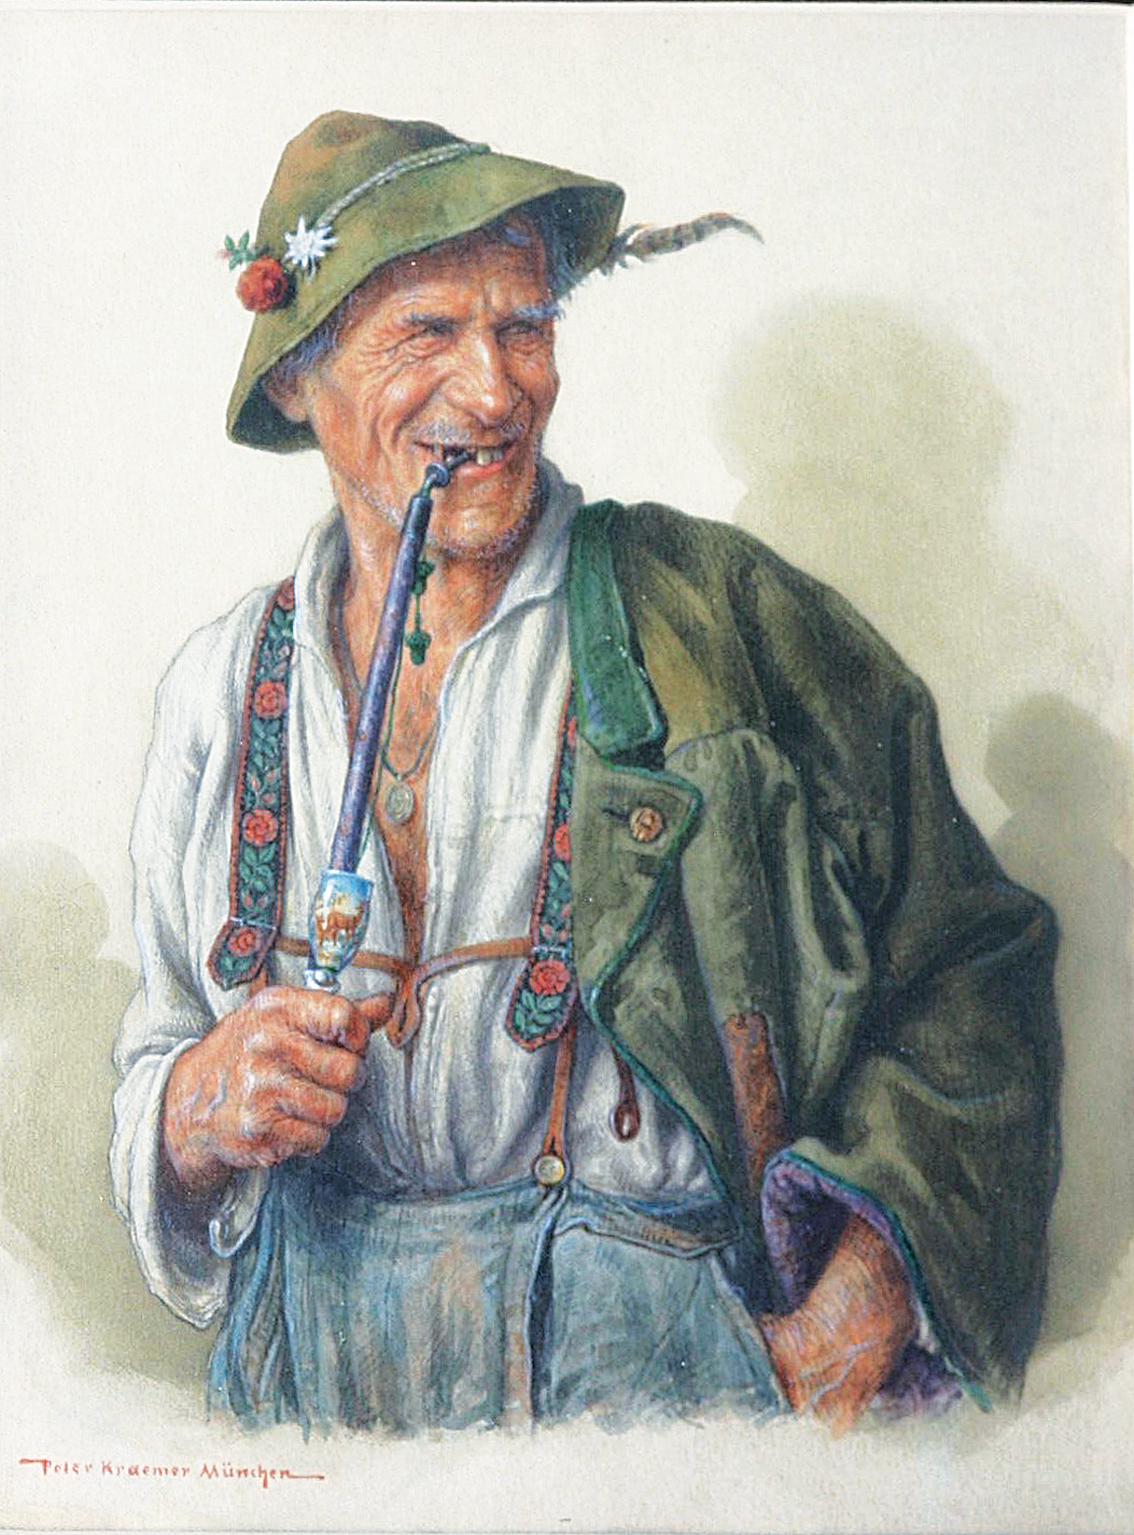 A portrait of a man smoking in traditional costume